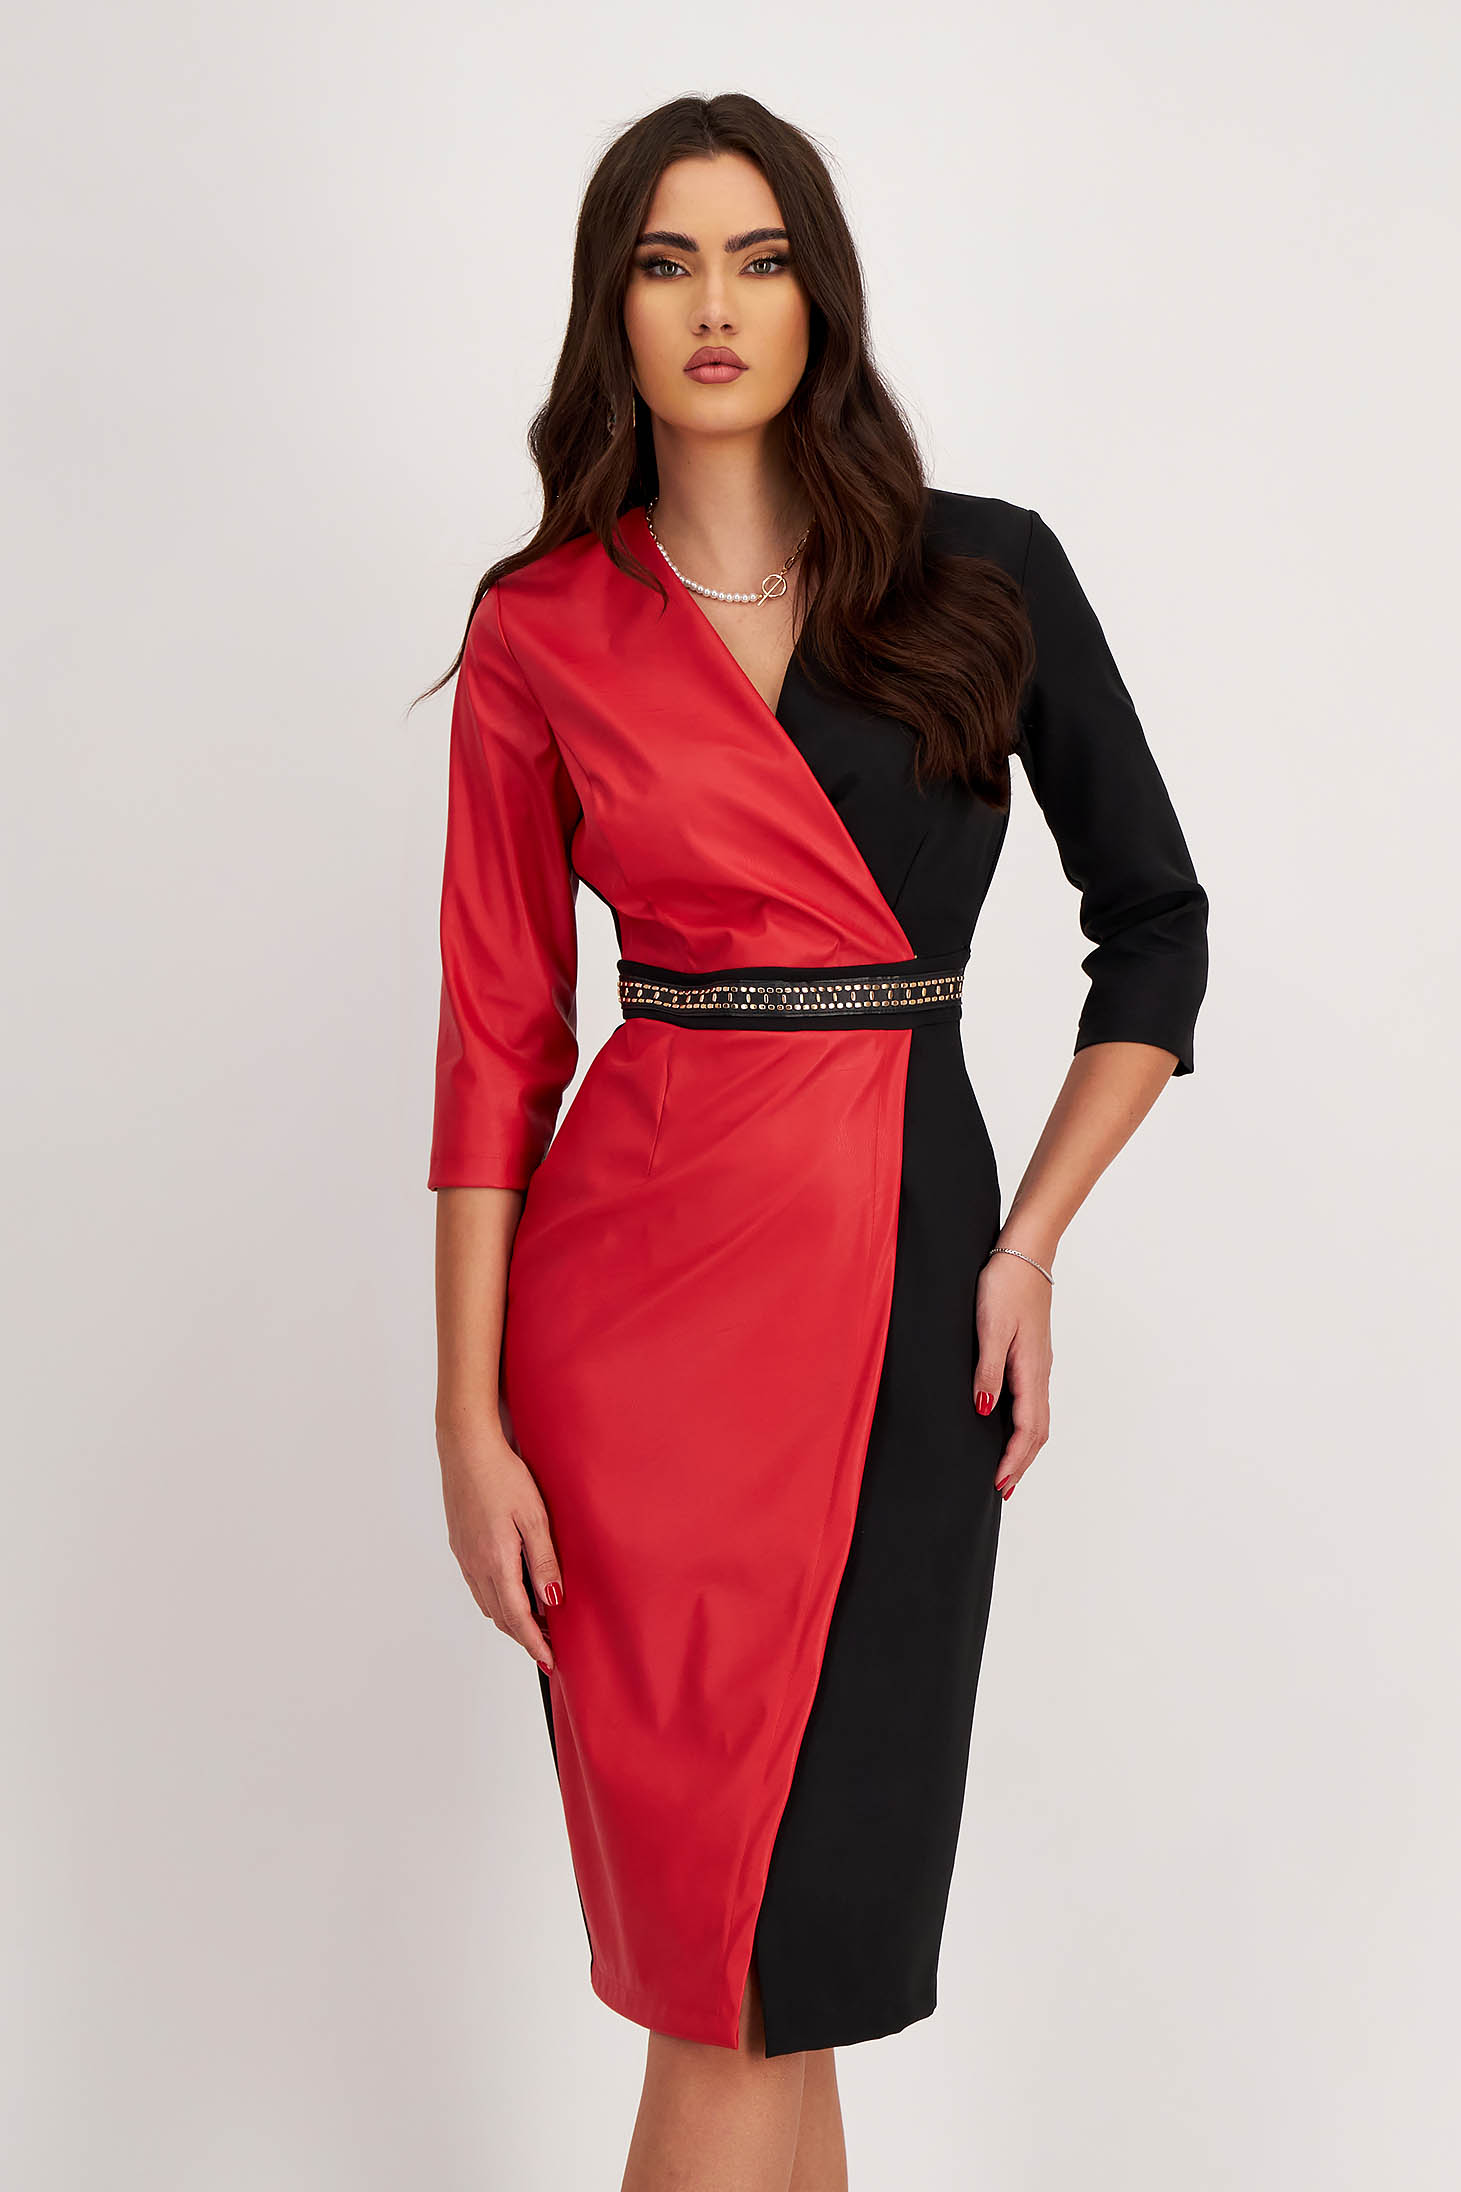 Faux Leather and Red Stretch Fabric Pencil Dress with Wraparound Neckline and Metallic Appliques - StarShinerS